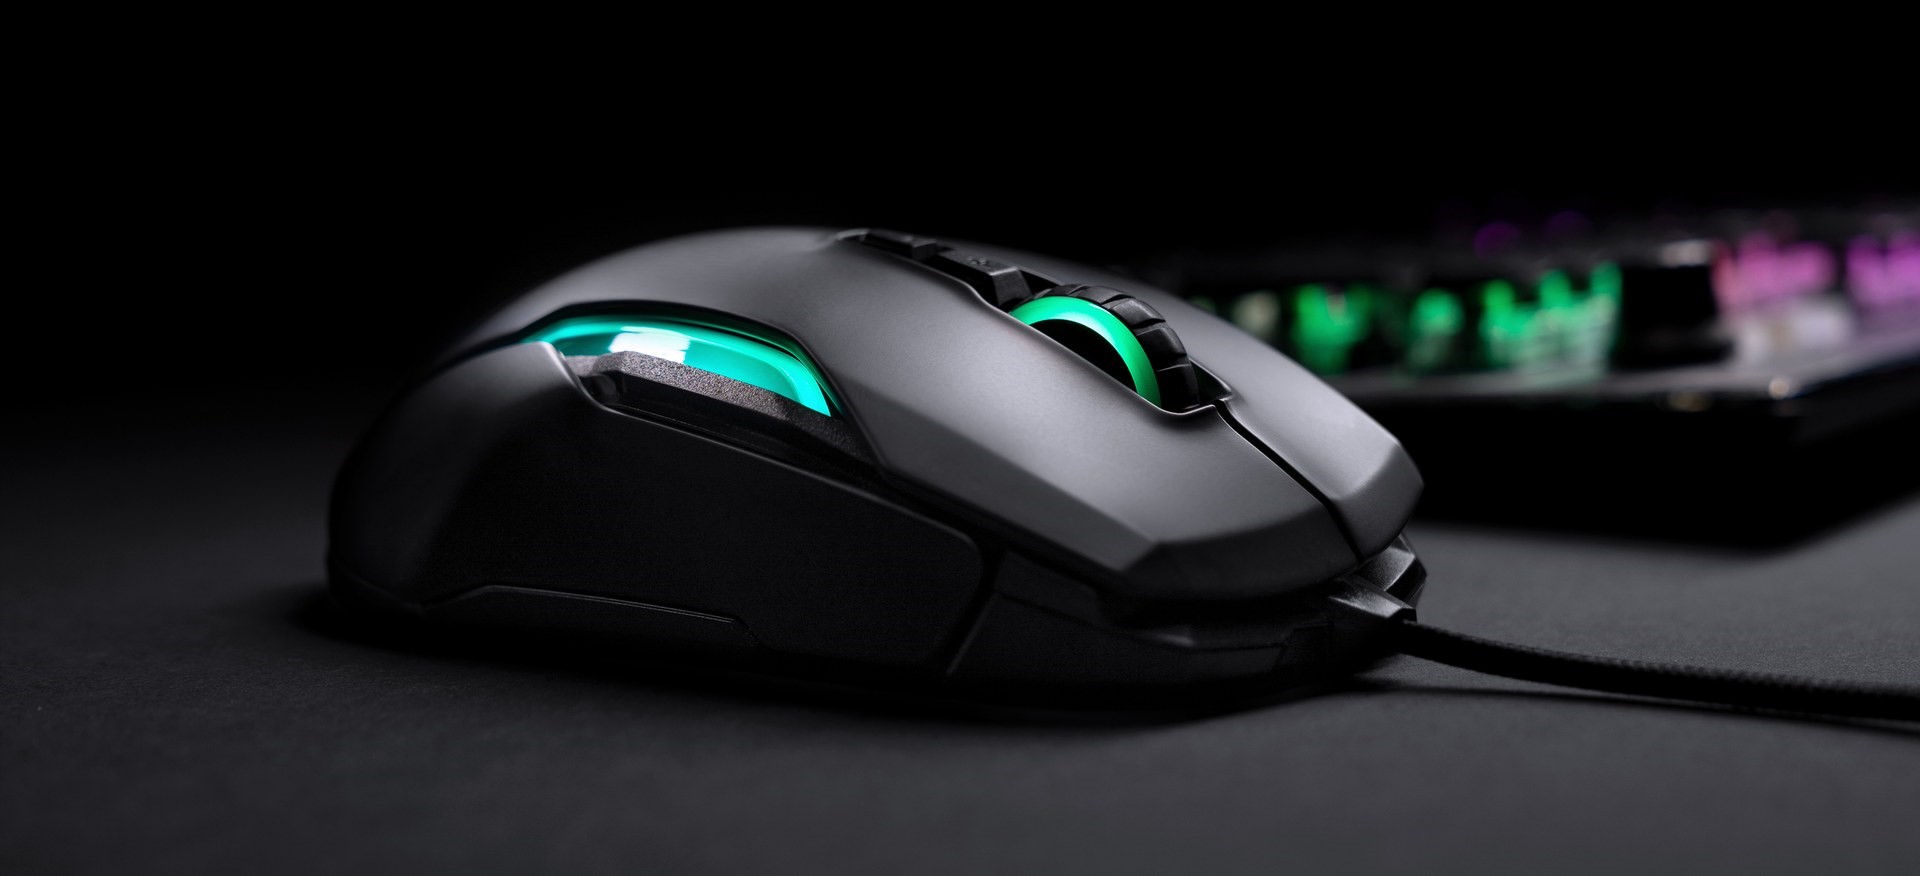 Roccat Kone AIMO Remastered RGB Gaming Mouse - Black